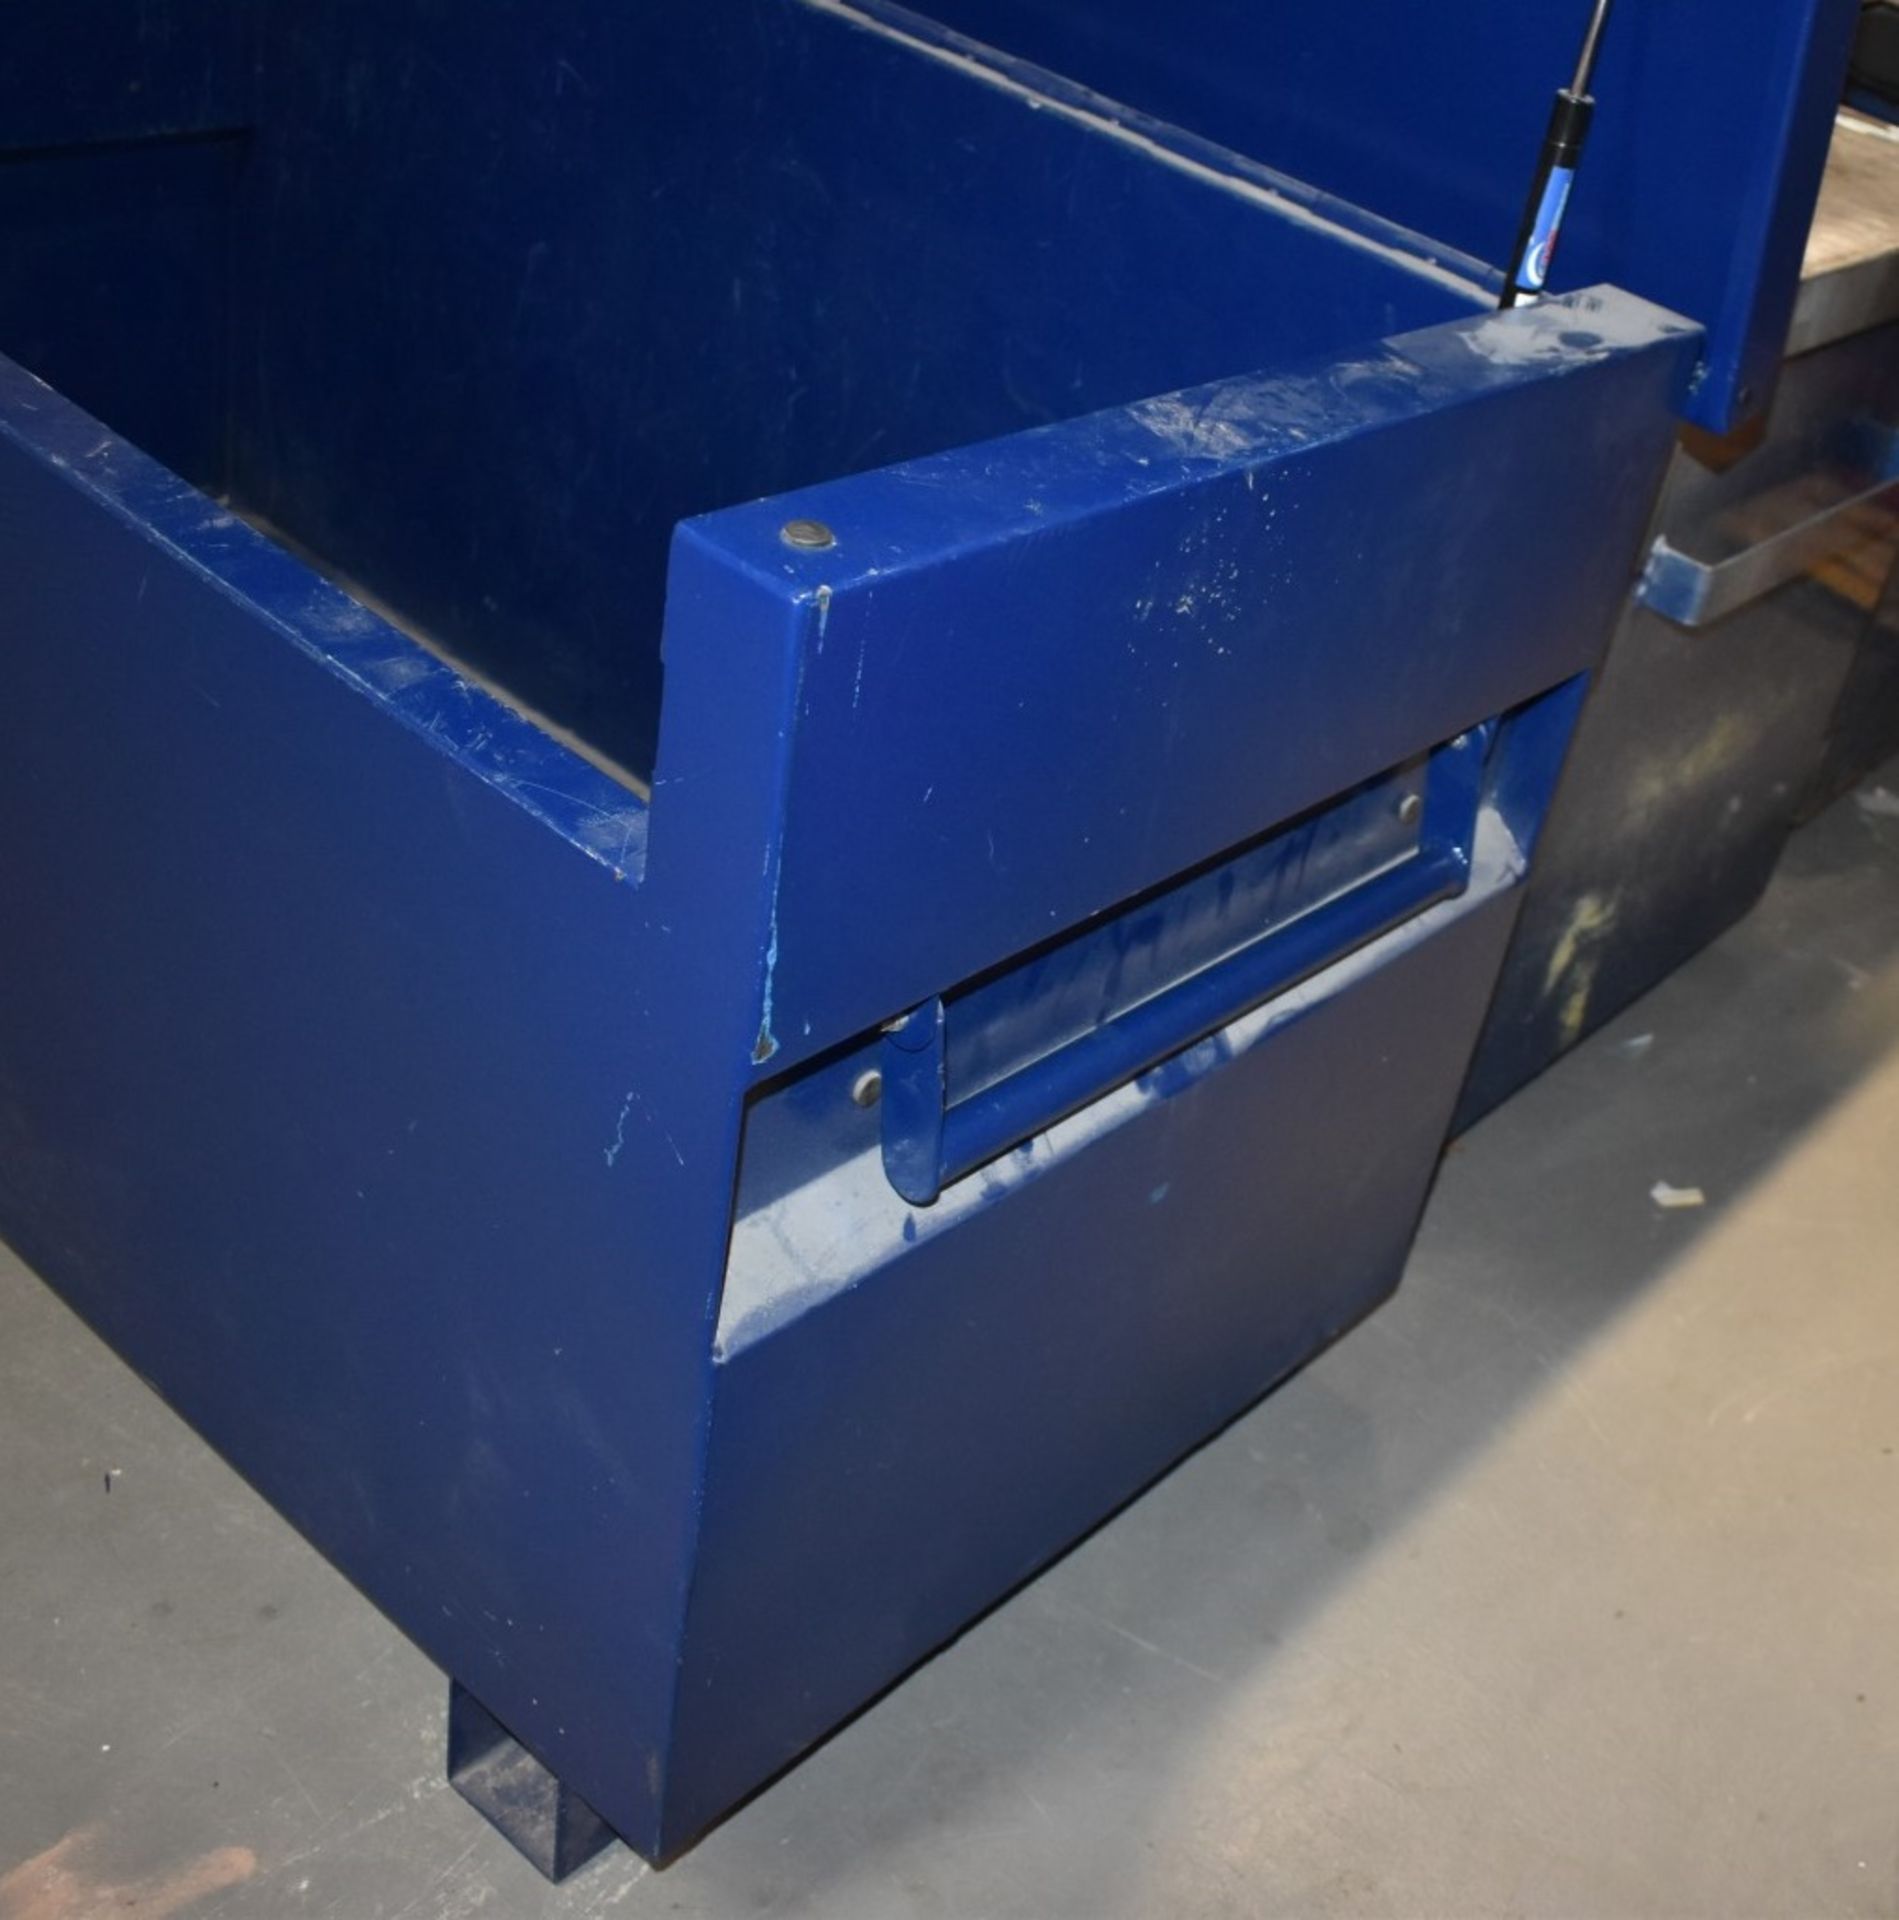 1 x TradeSafe Tool Storage Chest - Ideal For Use on Worksites and Vans To Help Protect Your - Image 5 of 5